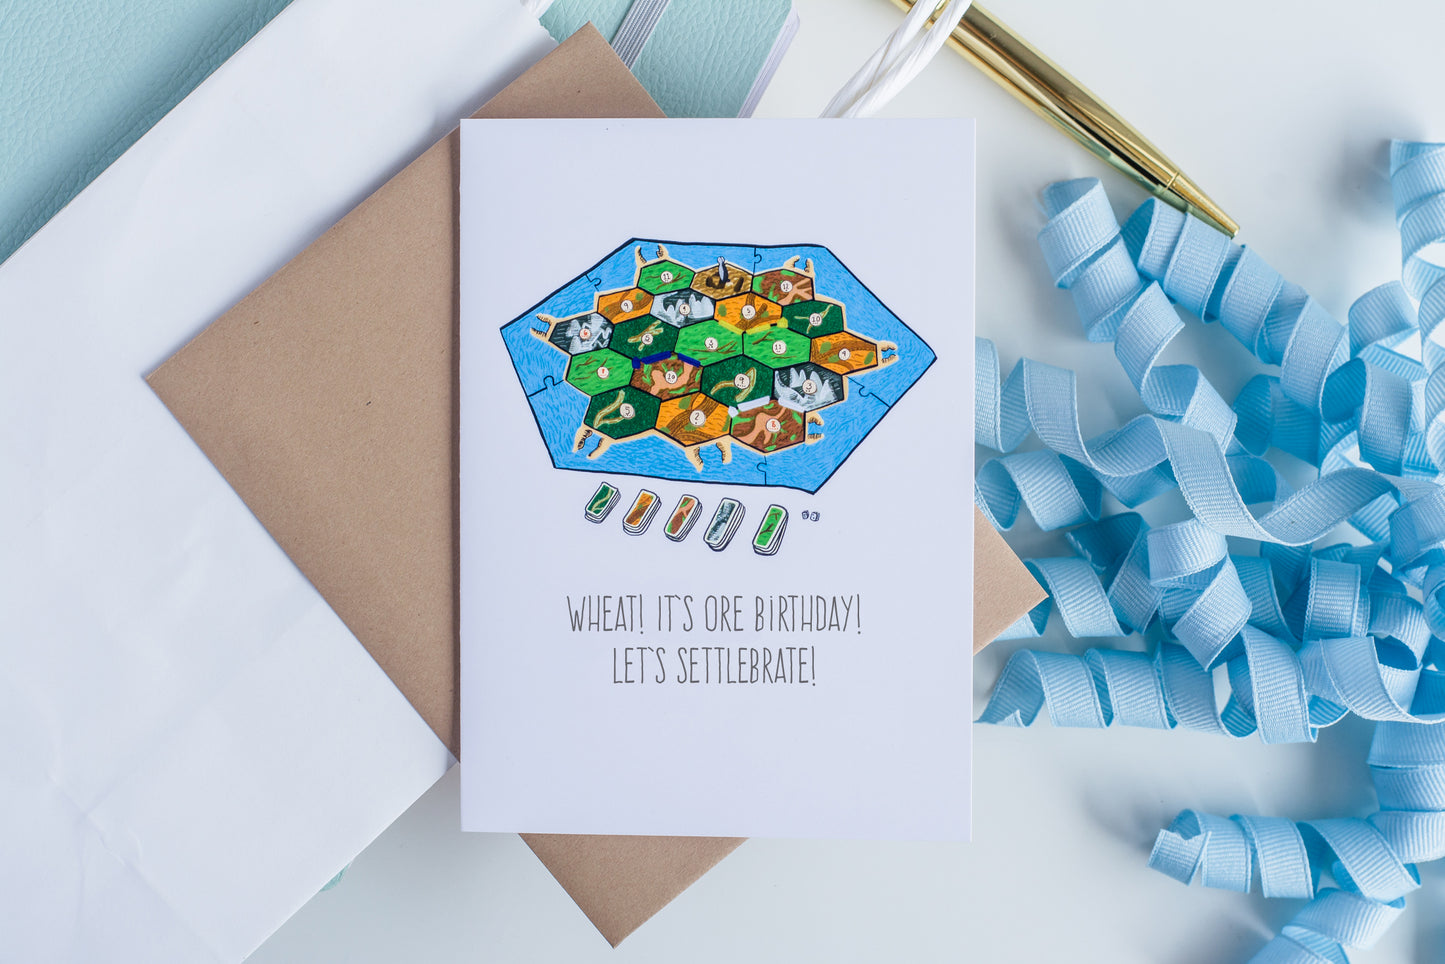 Wheat! It's Ore Birthday! Let's Settlebrate! - Greeting Card